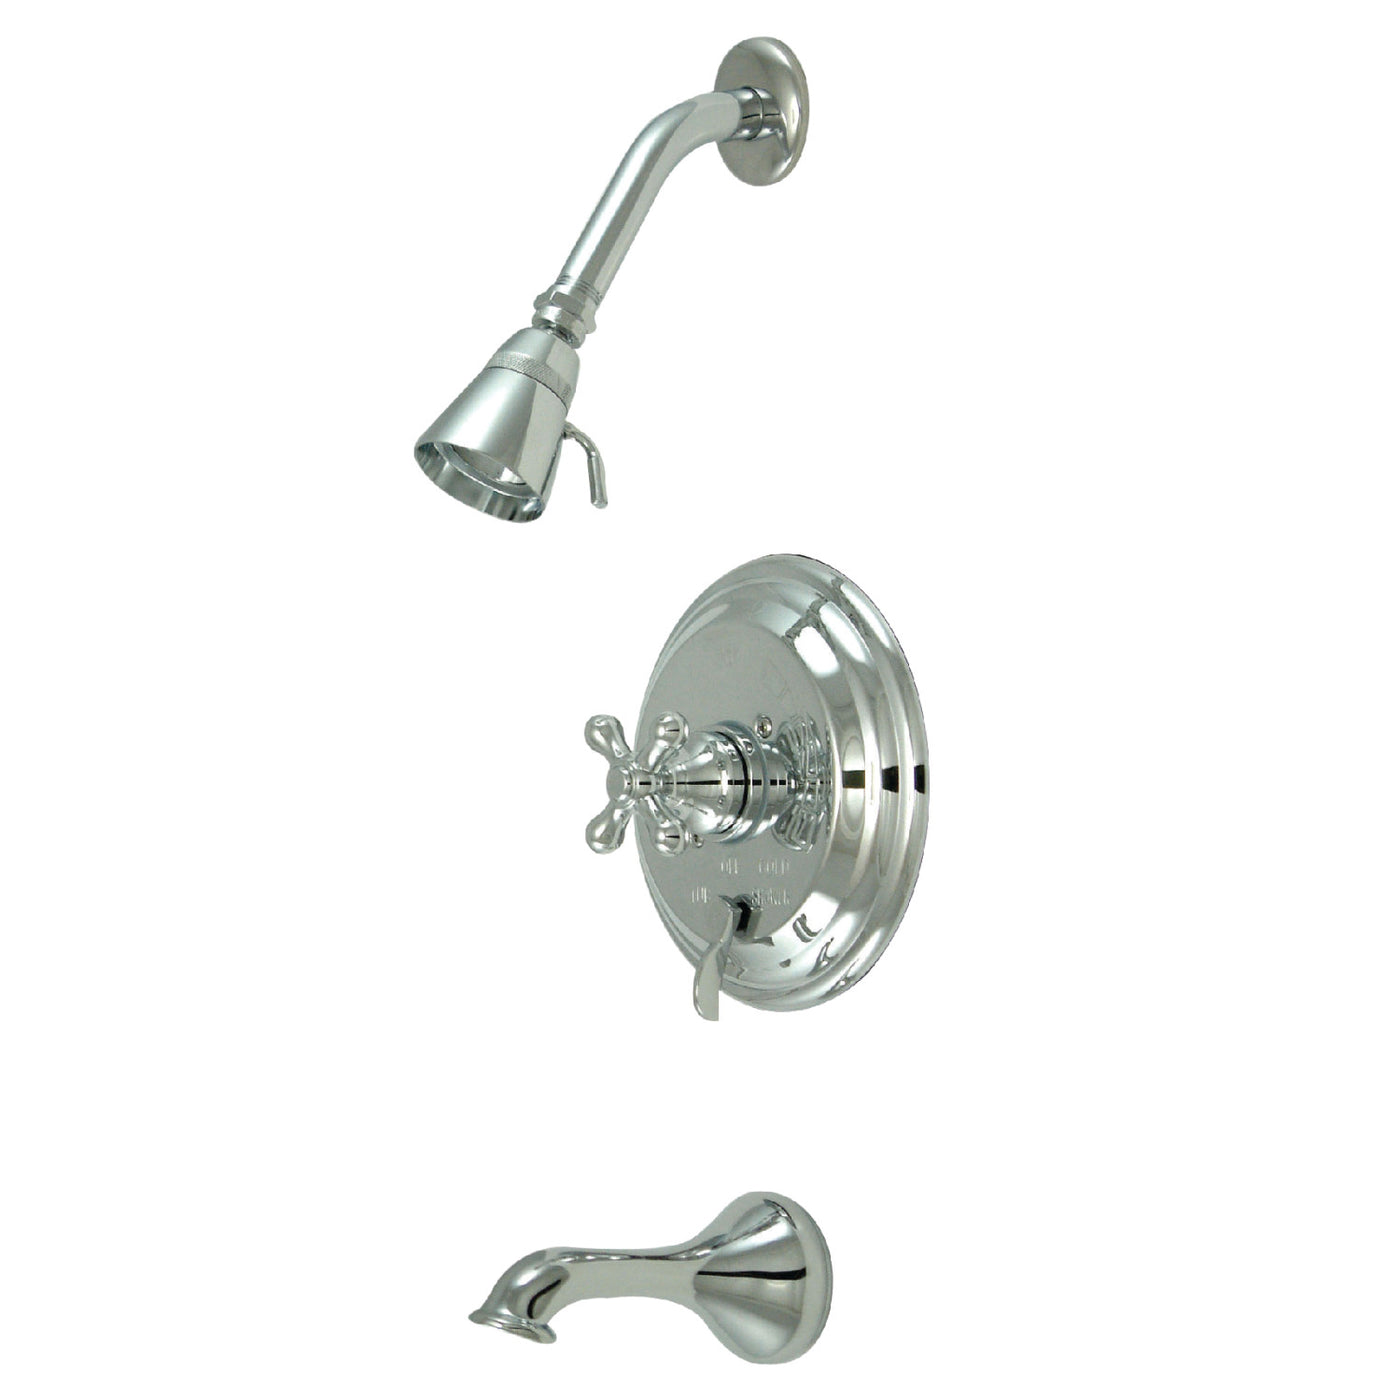 Elements of Design EB36310AX Tub and Shower Faucet, Polished Chrome